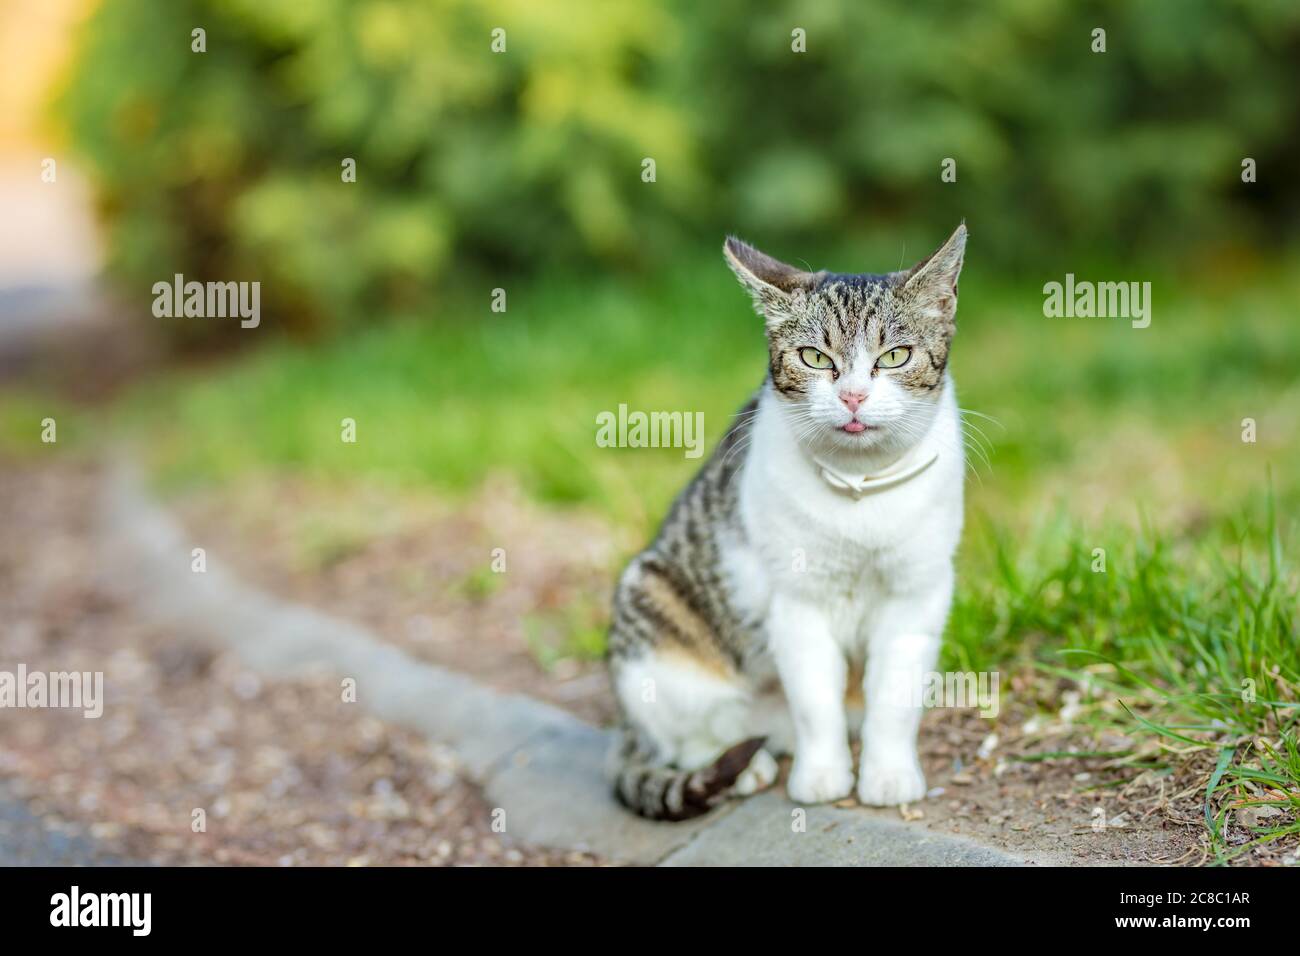 Front view of a tabby white British short hair cat balancing on stone fence. Beautiful cat pet portrait, outdoor green nature blur Stock Photo